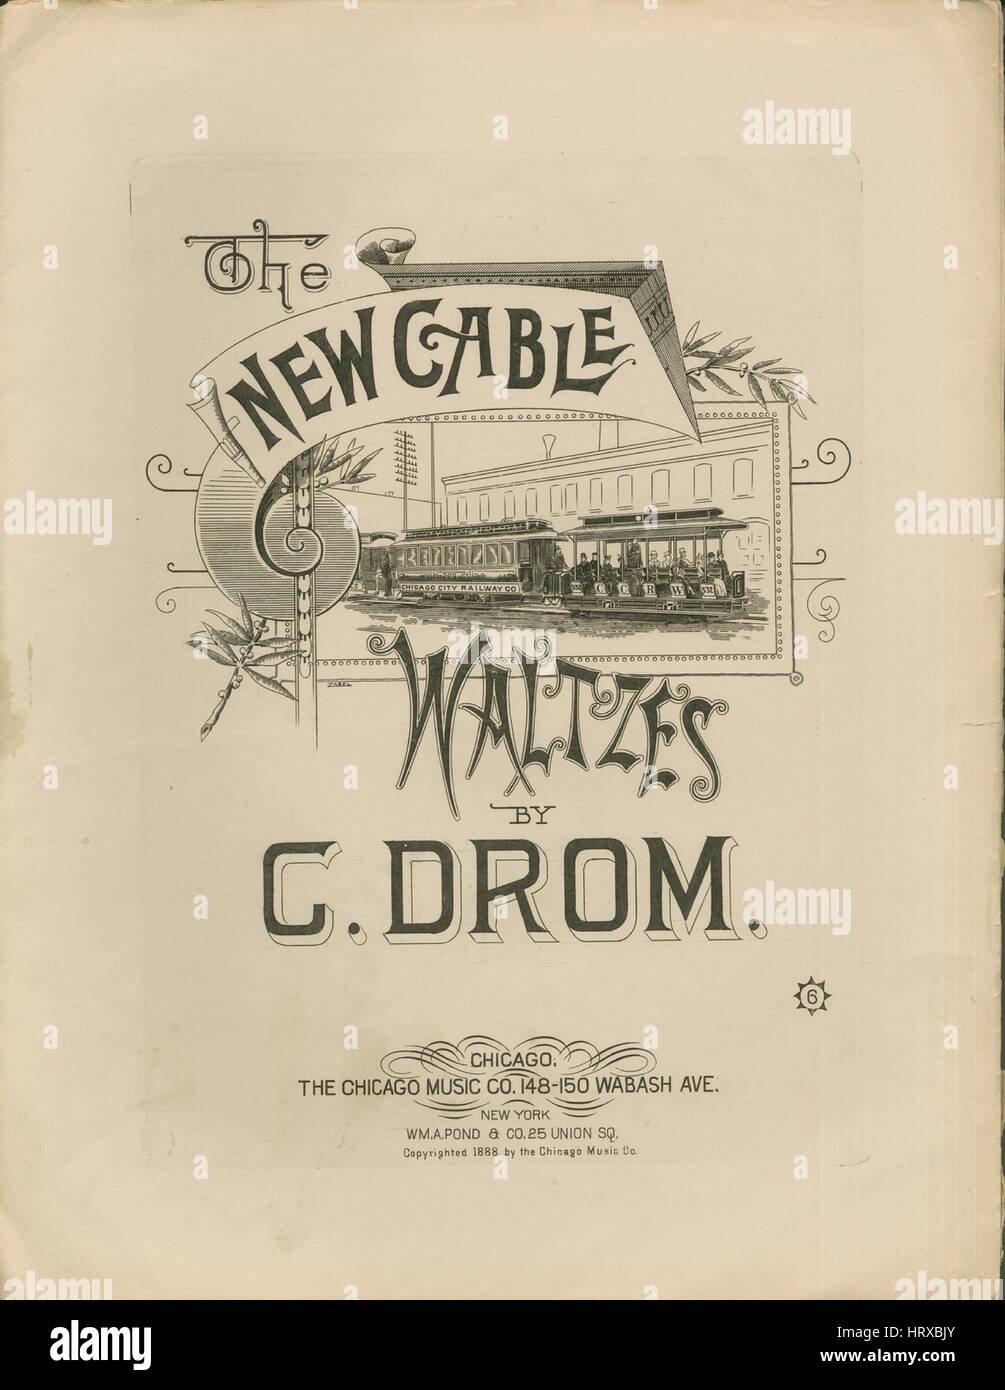 Sheet music cover image of the song 'The New Cable Waltzes', with original authorship notes reading 'By C Drom', United States, 1888. The publisher is listed as 'The Chicago Music Co., 148-150 Wabash Ave.', the form of composition is 'sectional', the instrumentation is 'piano', the first line reads 'None', and the illustration artist is listed as 'None'. Stock Photo